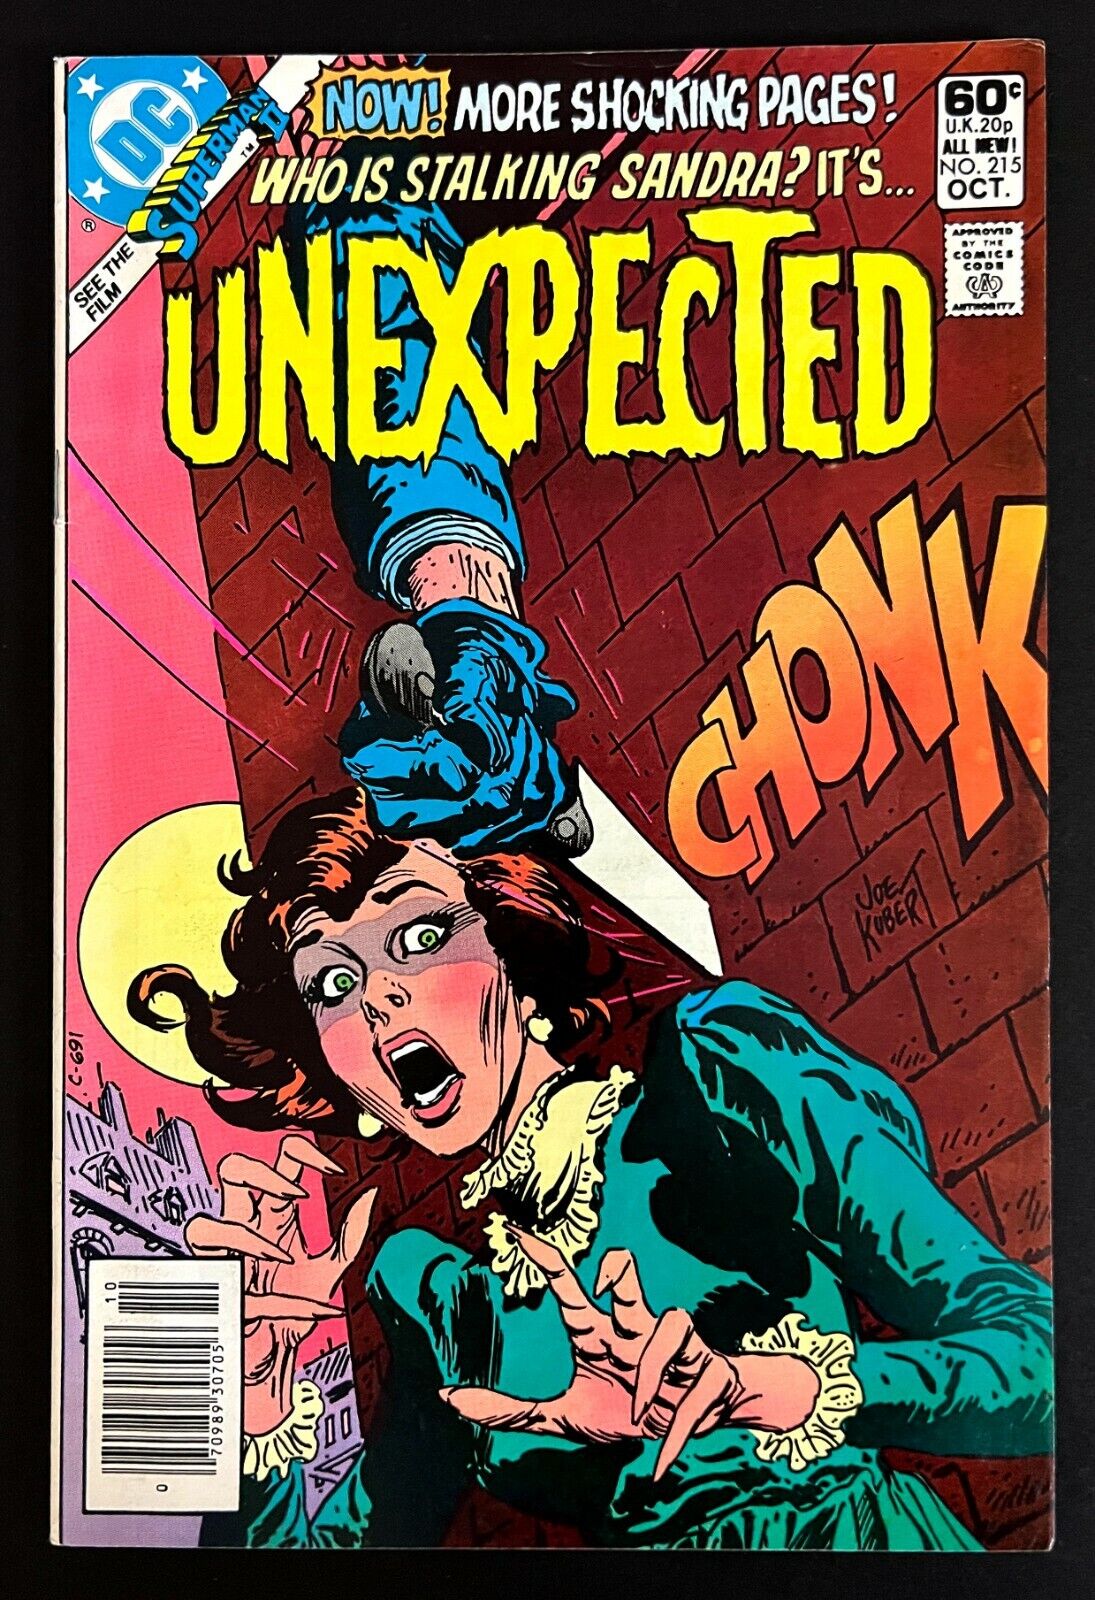 THE UNEXPECTED #215 Jack The Ripper Cover By Joe Kubert DC Comics 1981